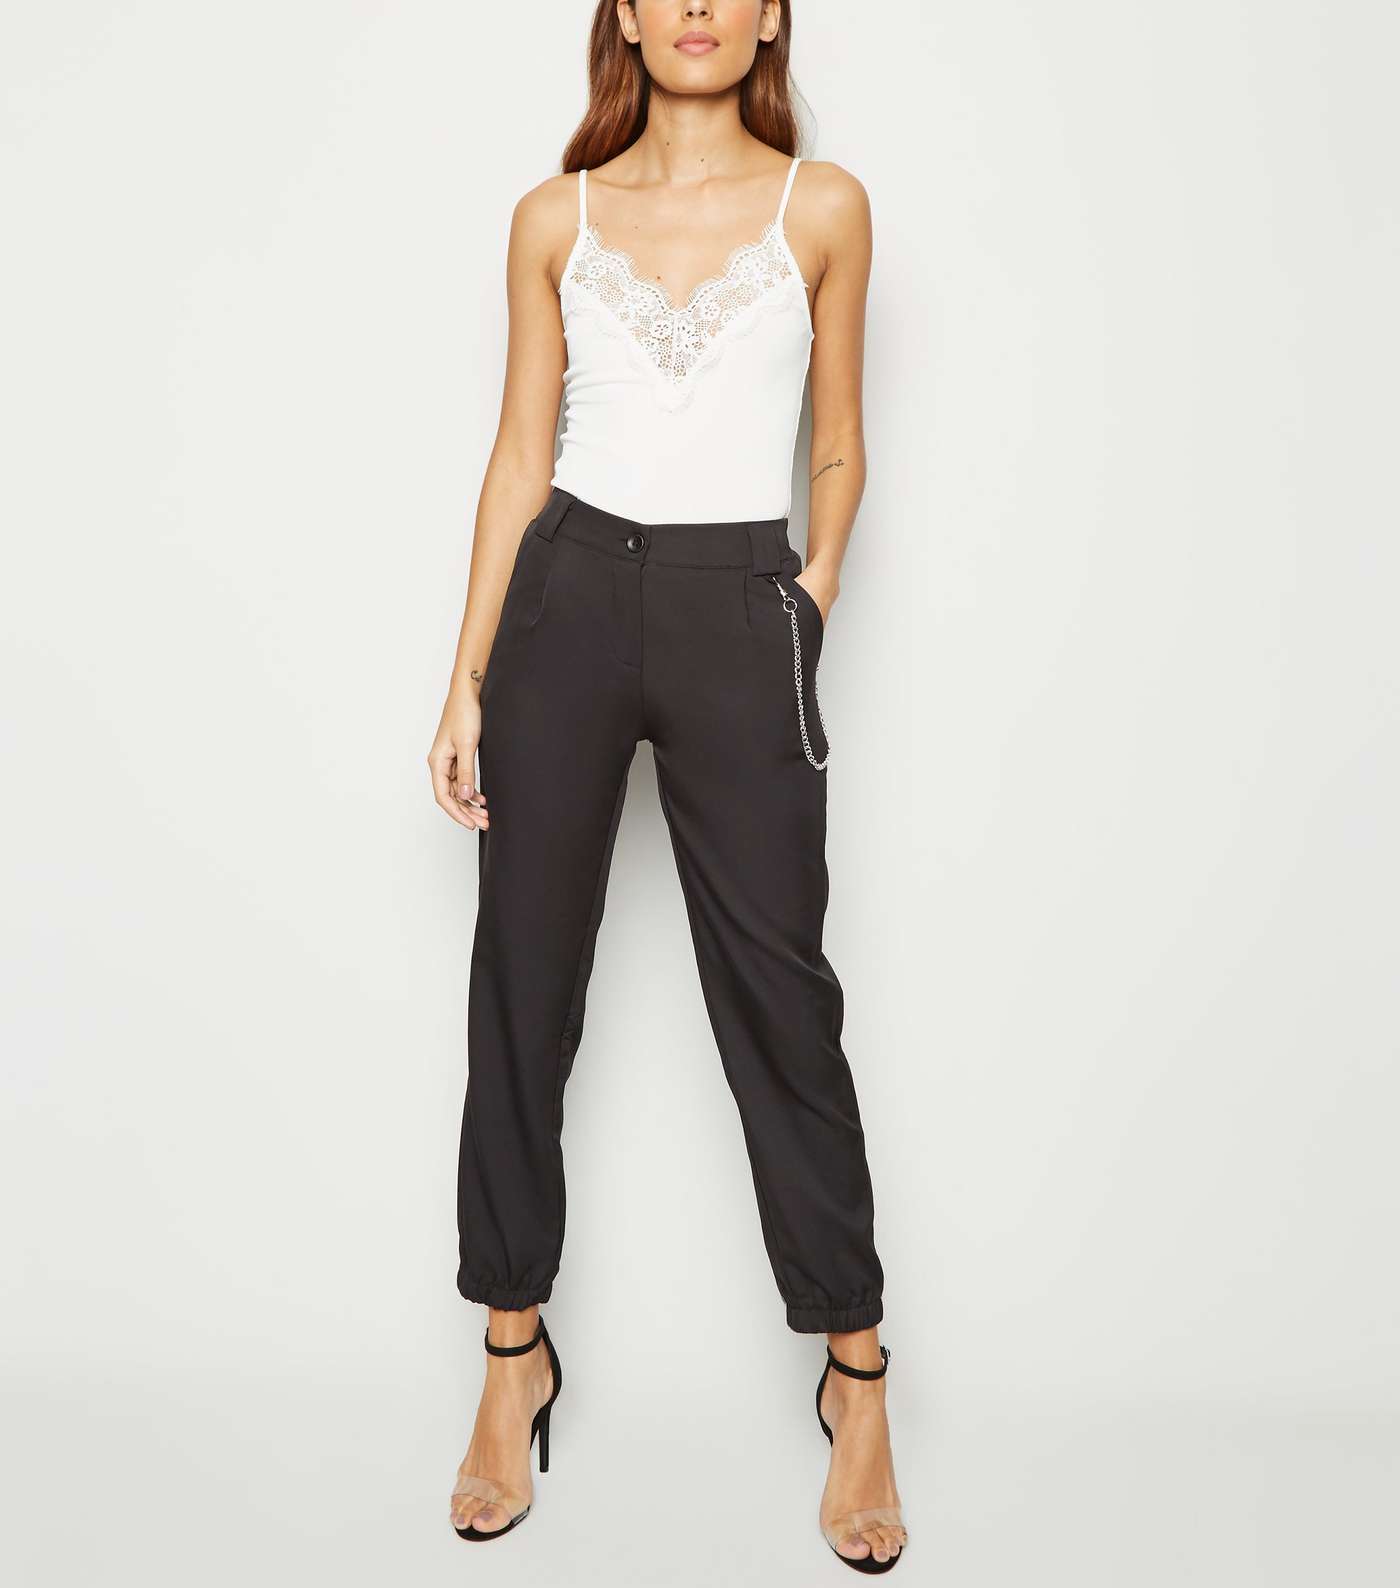 Cameo Rose Black Side Chain Trousers